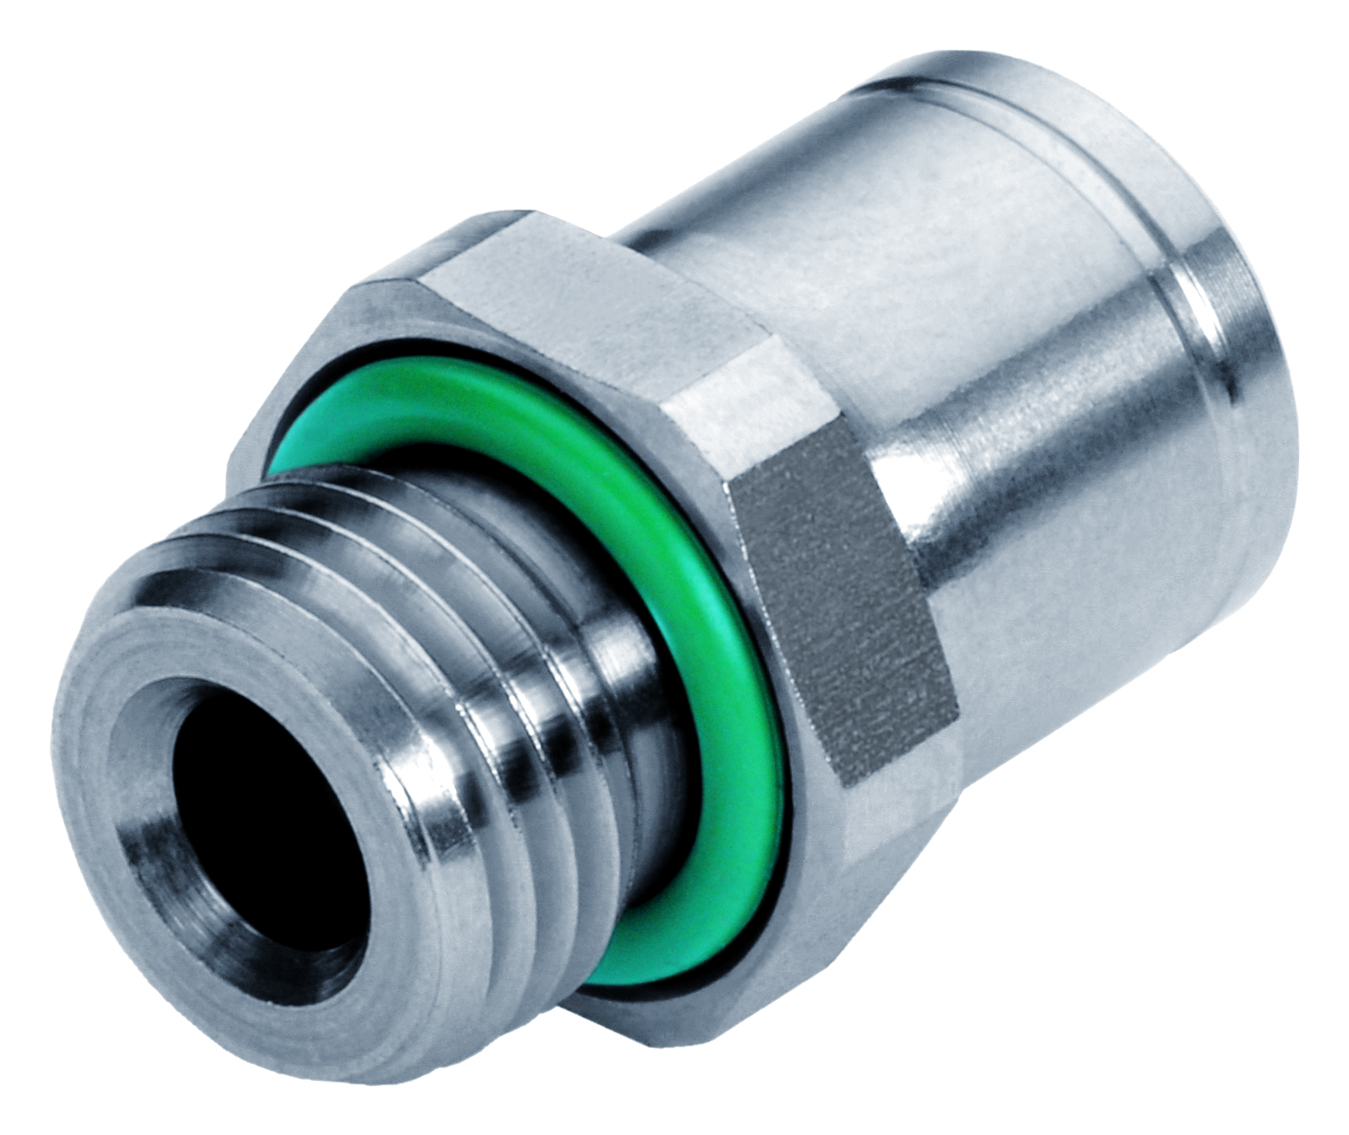 External Hex Push To Connect Straight Screw-In Connector, Stainless STl, Metric G Thread - INOXLINE©